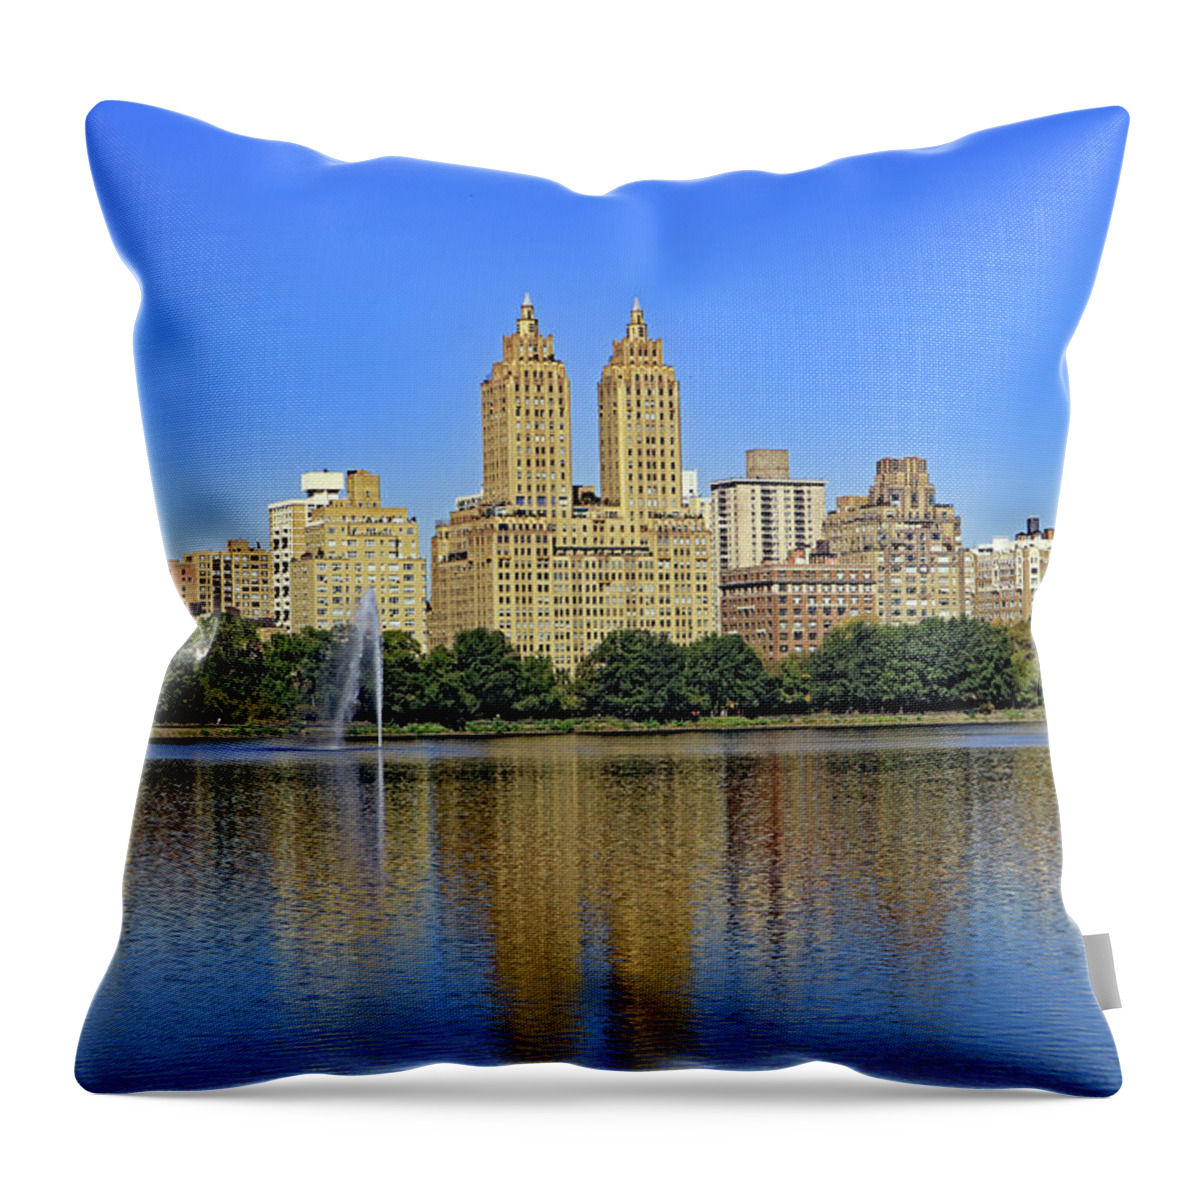 Reflections Throw Pillow featuring the photograph Central Park by Tony Murtagh